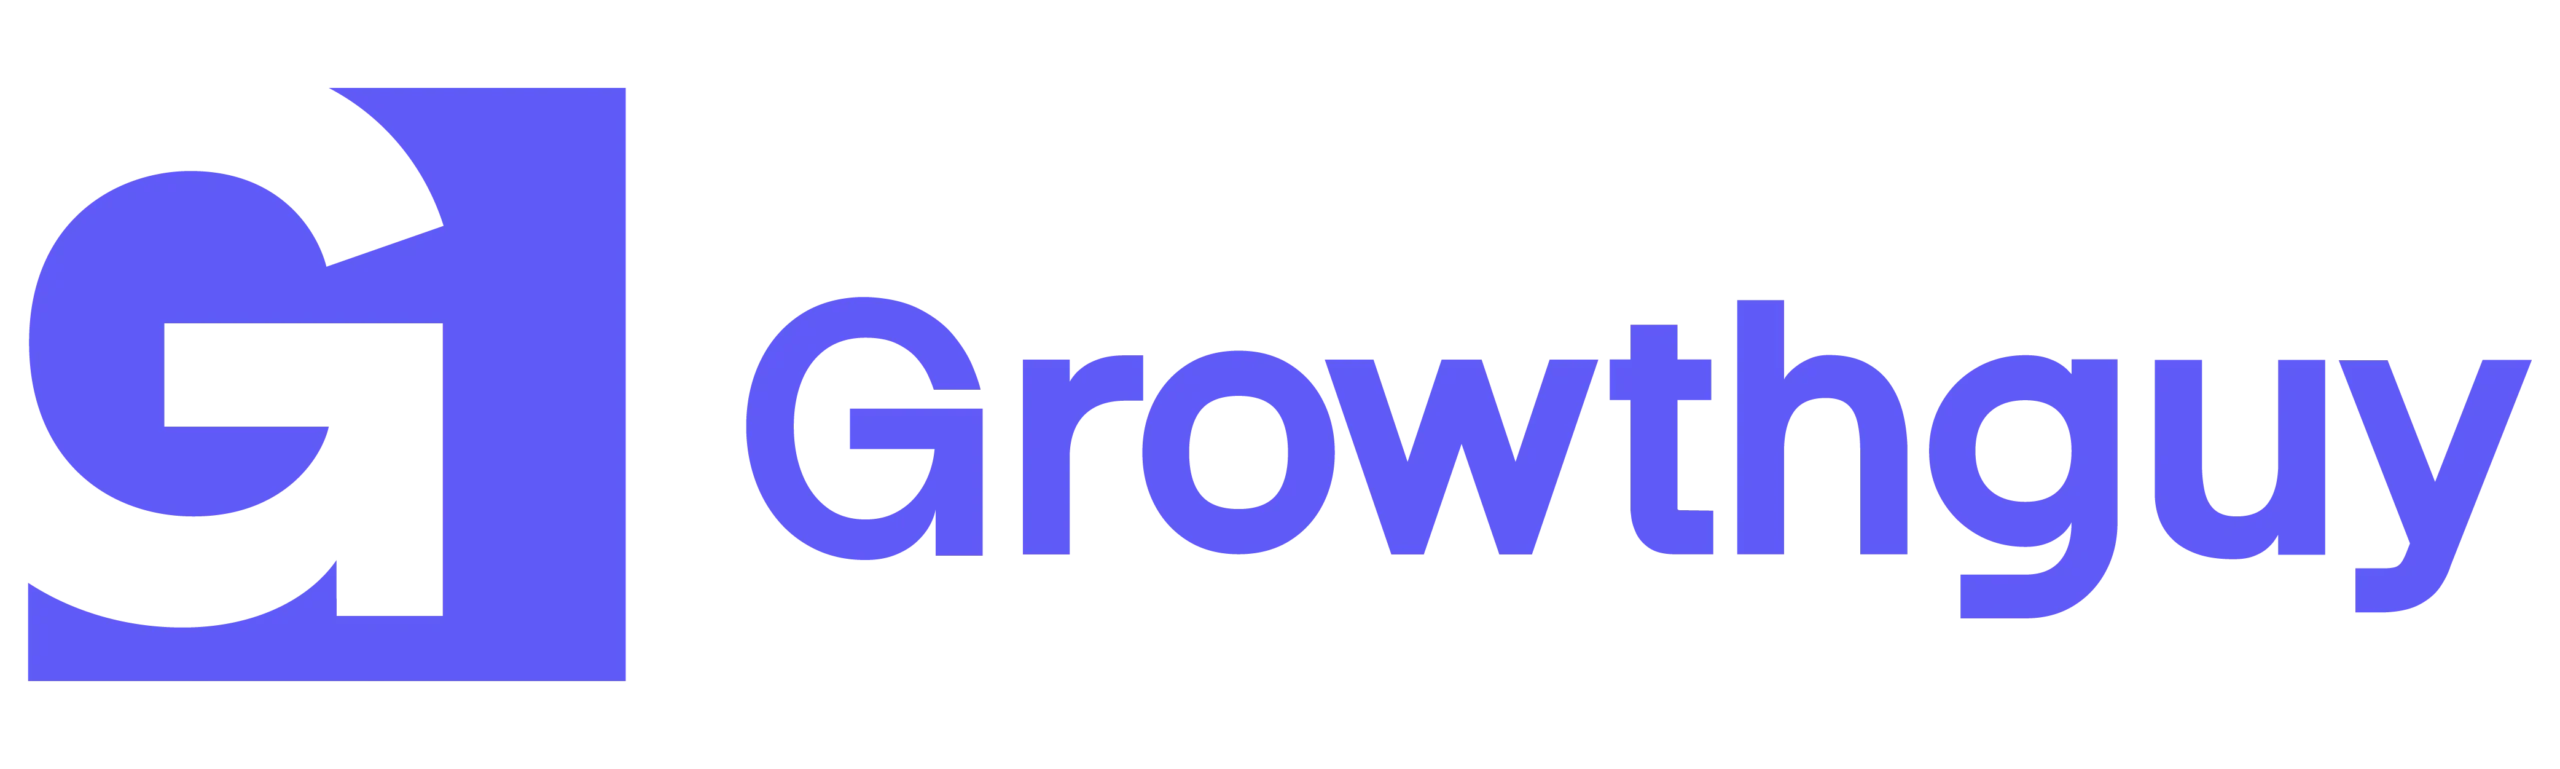 Expert Growth Consultant | Fractional CMO - Growthguy